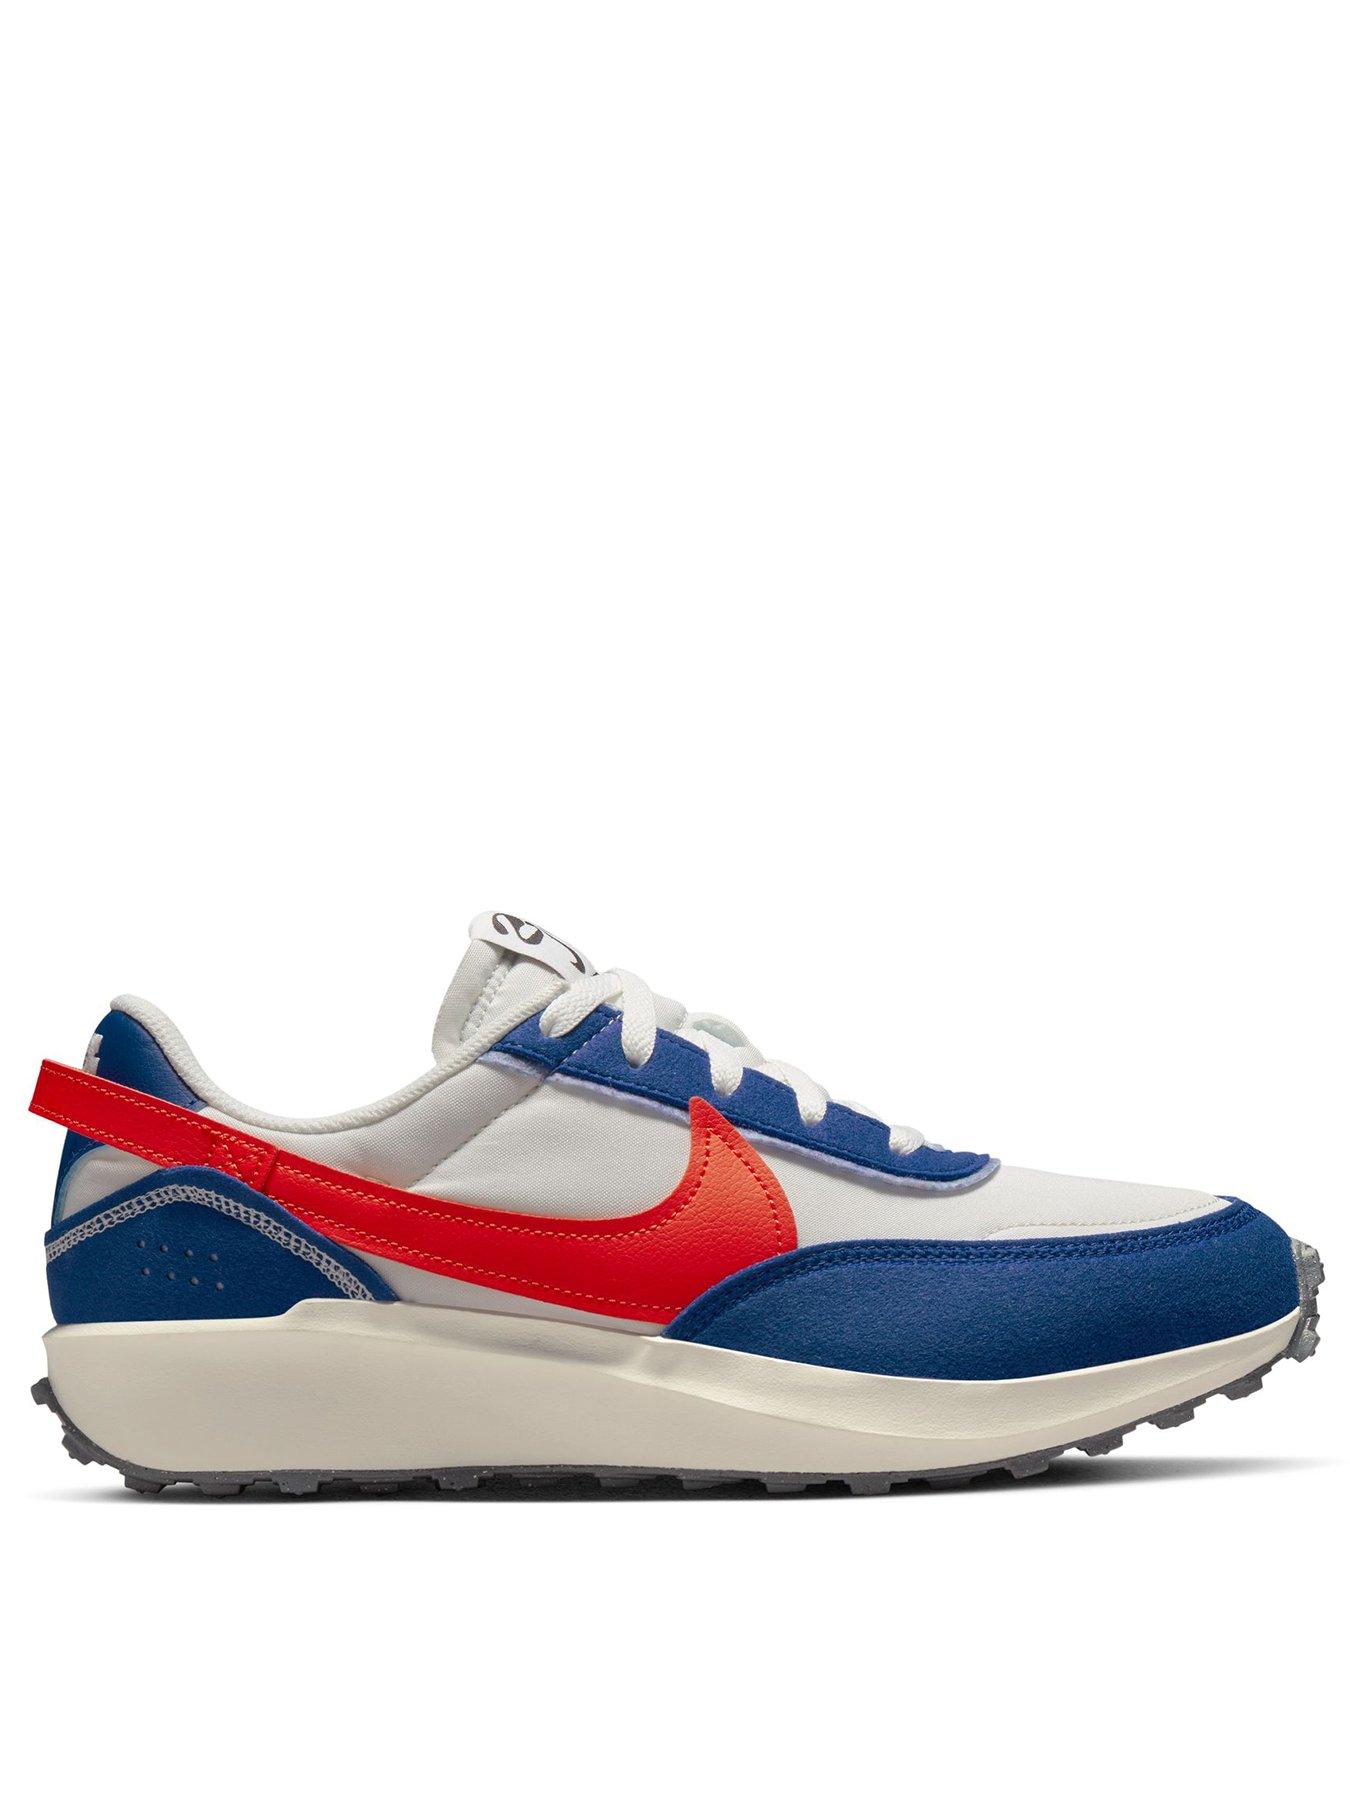 Nike Waffle Debut Swoosh - White/Blue/Red | very.co.uk